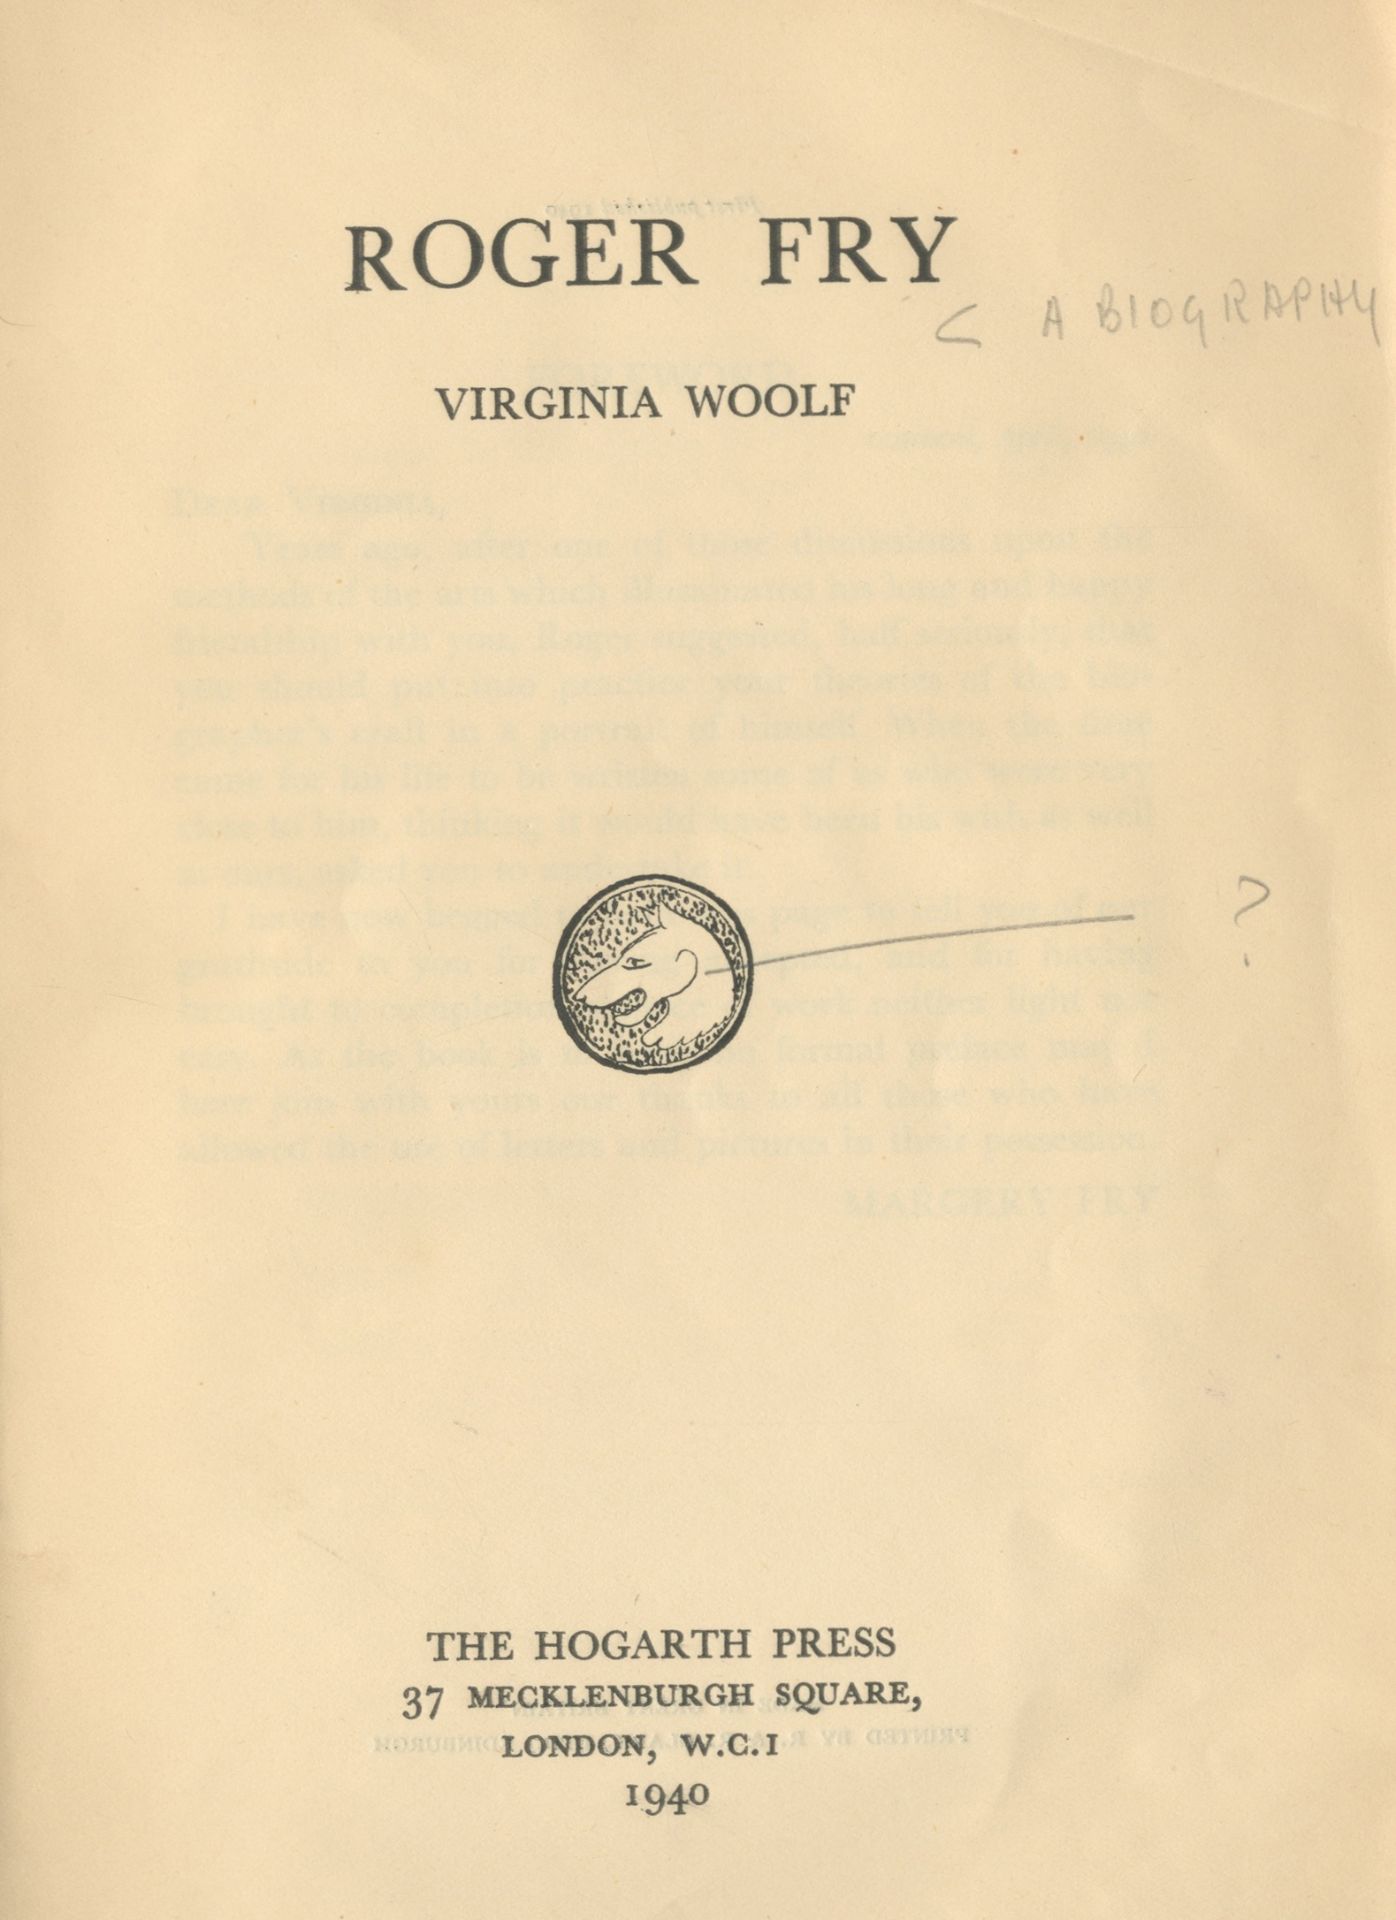 WOOLF (VIRGINIA) Roger Fry, UNCORRECTED PROOF COPY, WITH PENCIL CORRECTIONS in an unidentified ha...